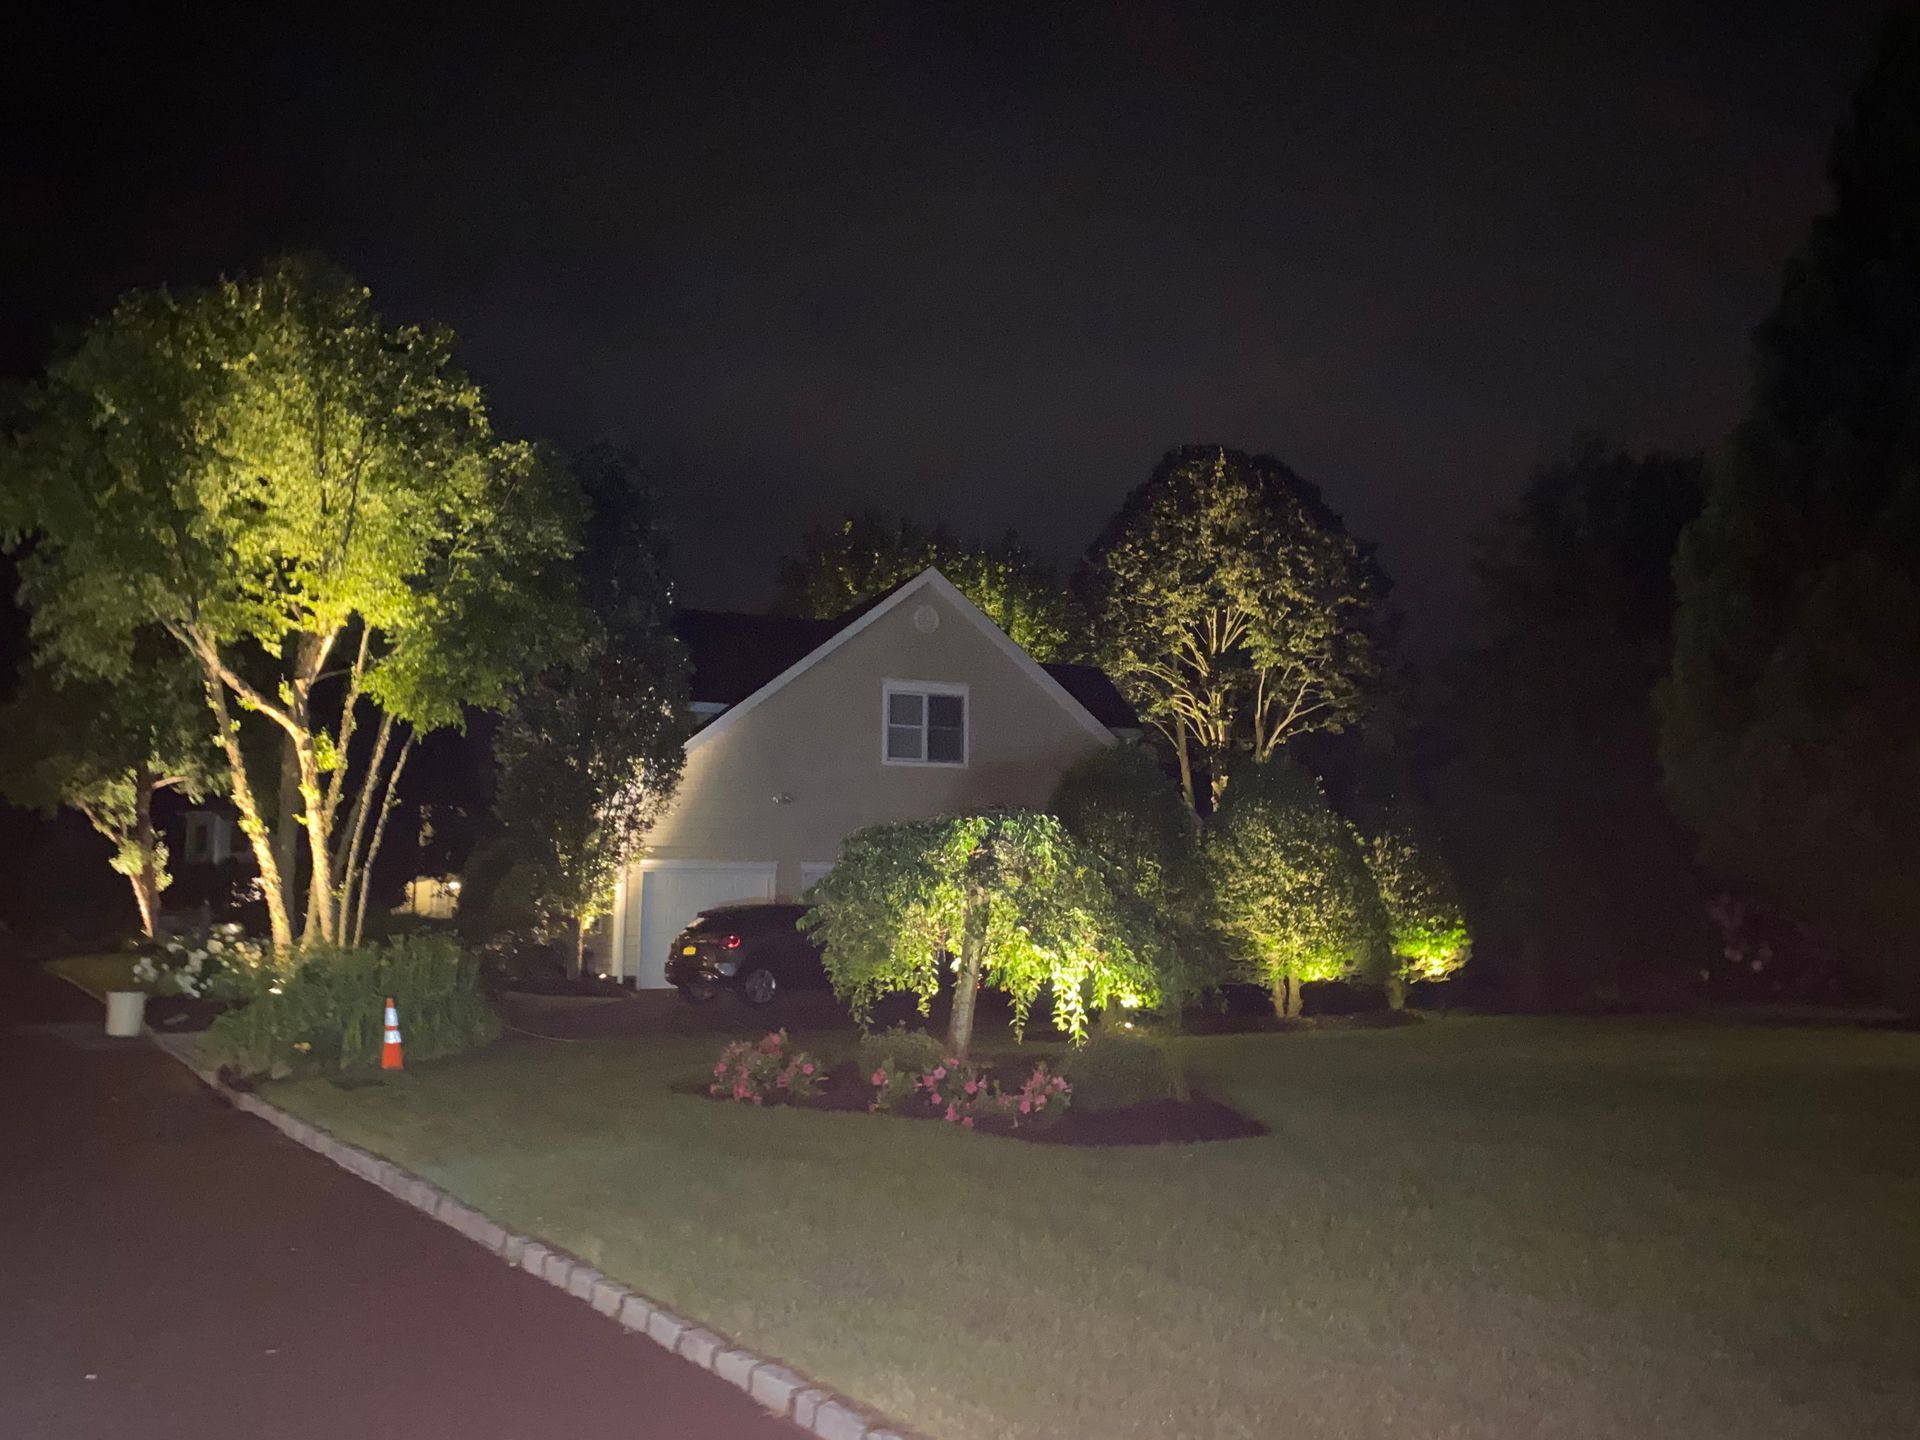 A house is lit up at night with trees in front of it